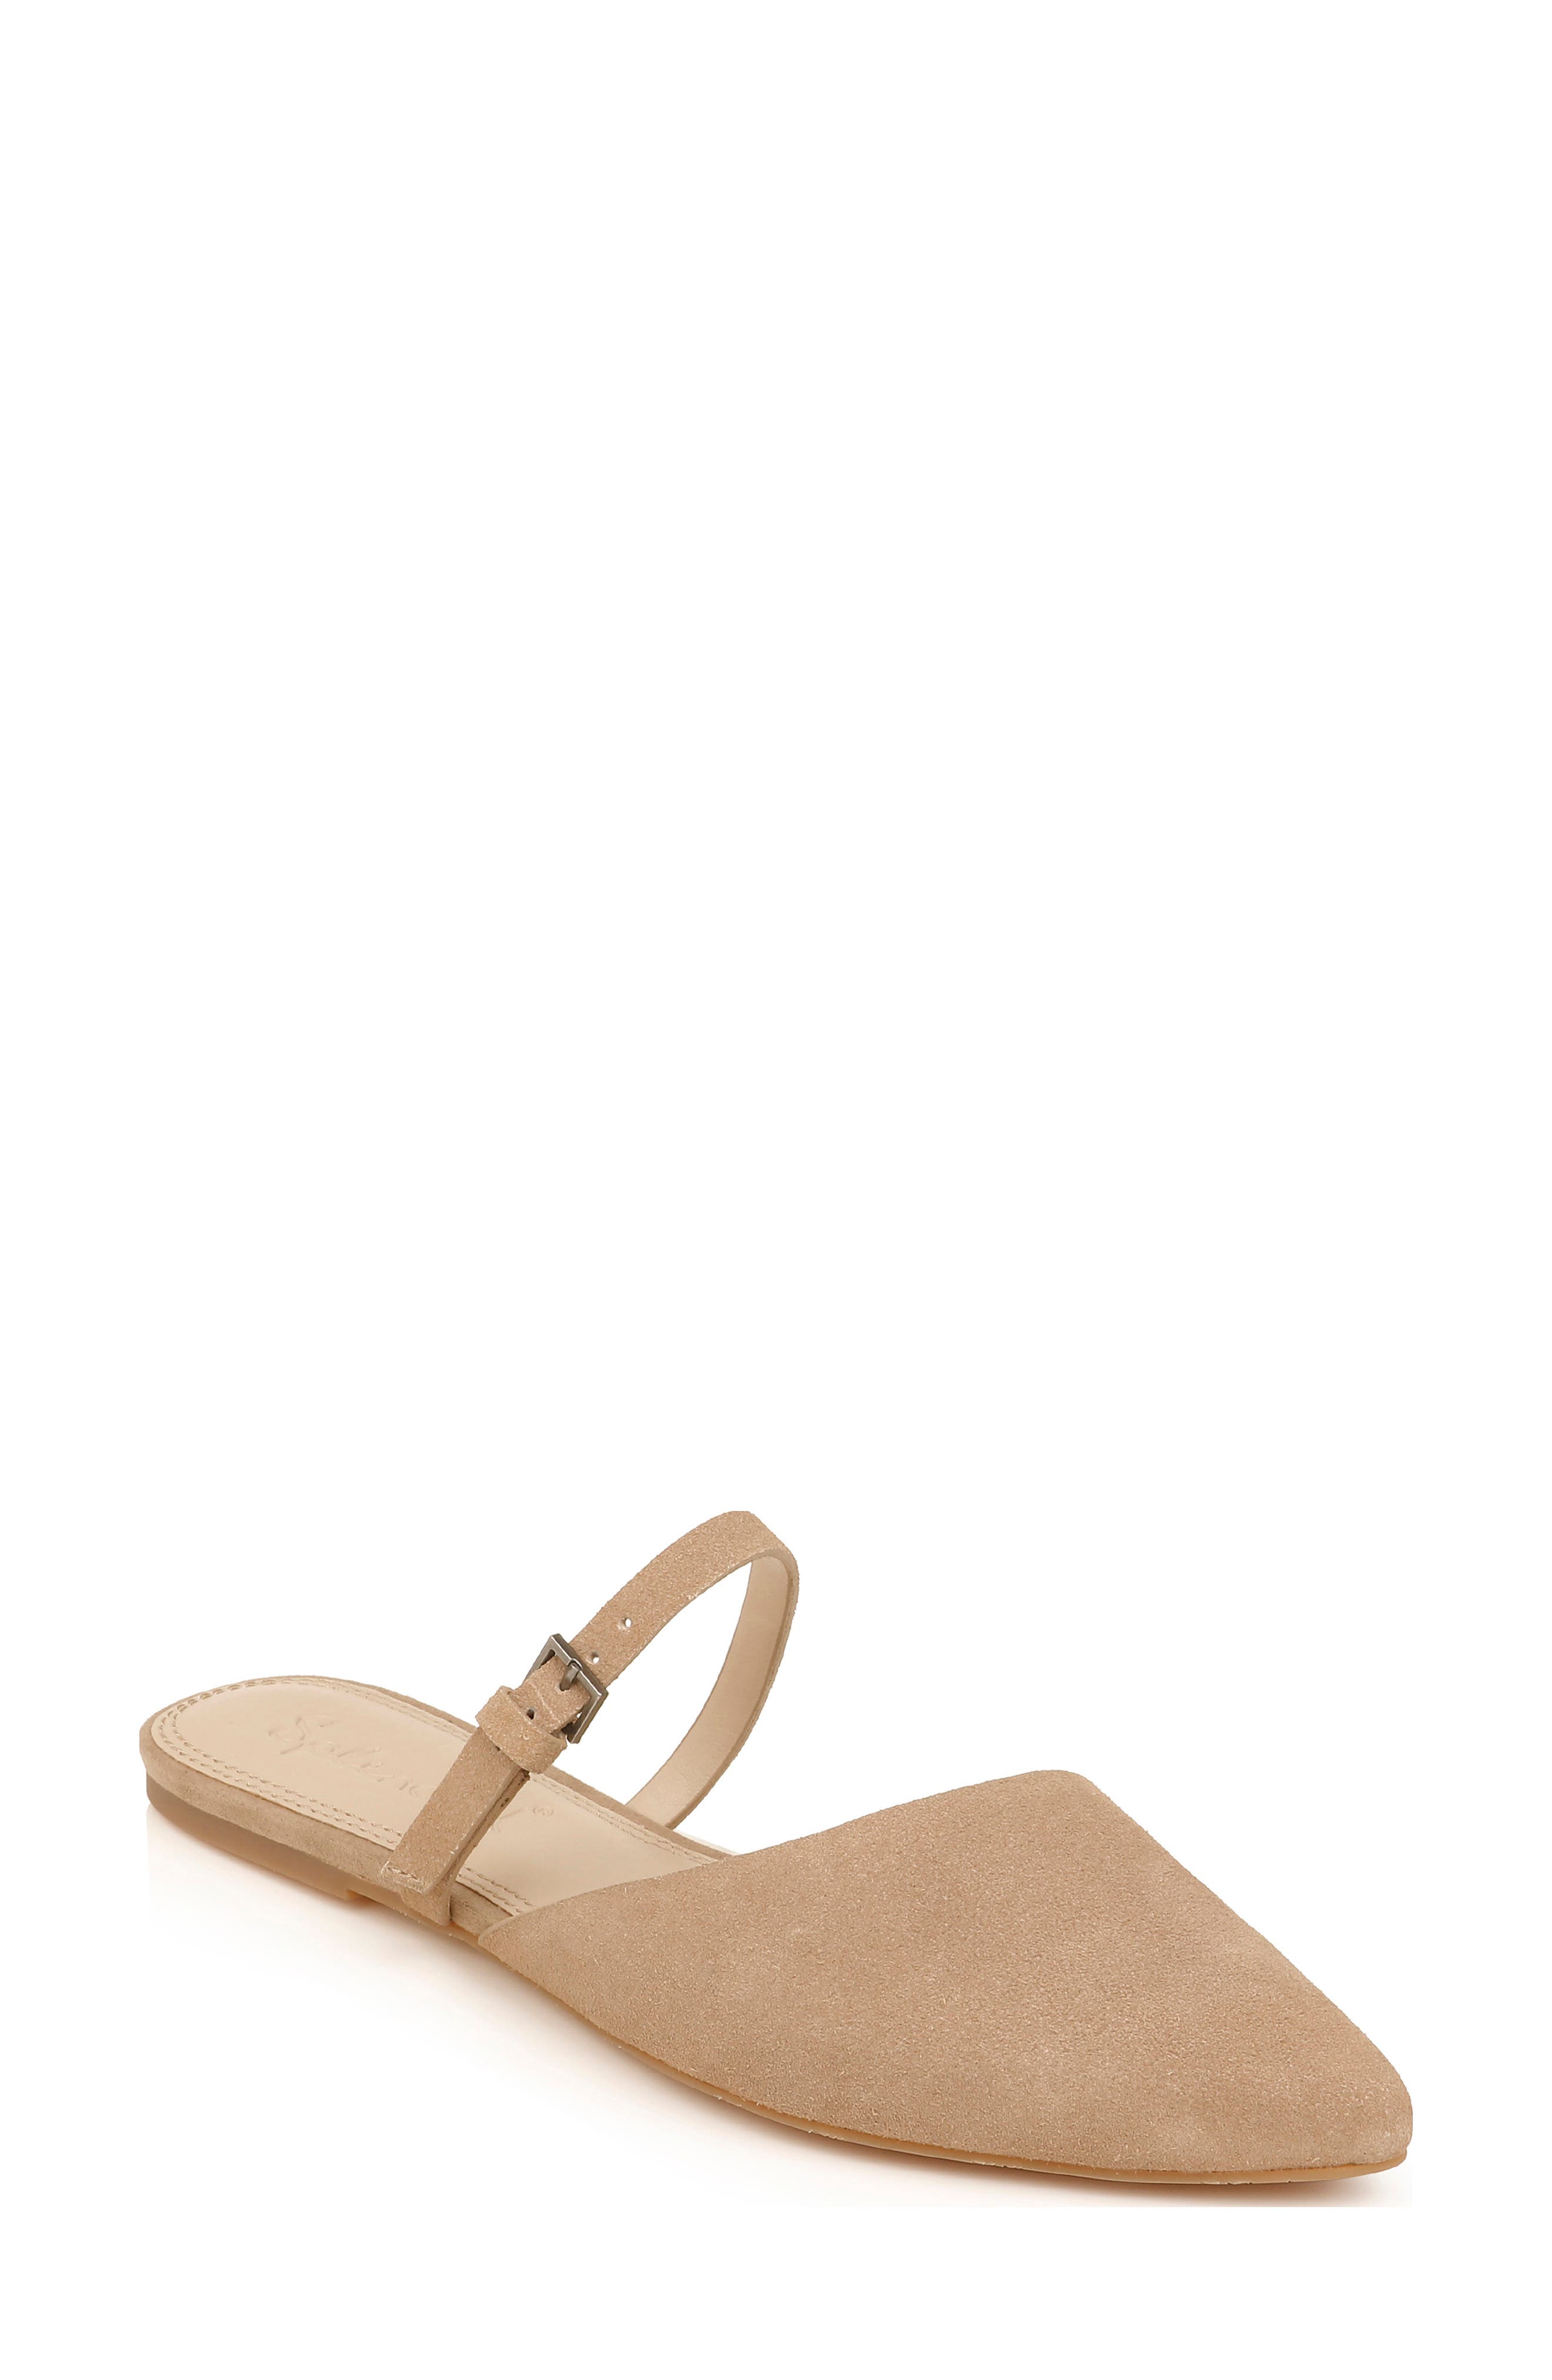 nordstrom mary jane shoes